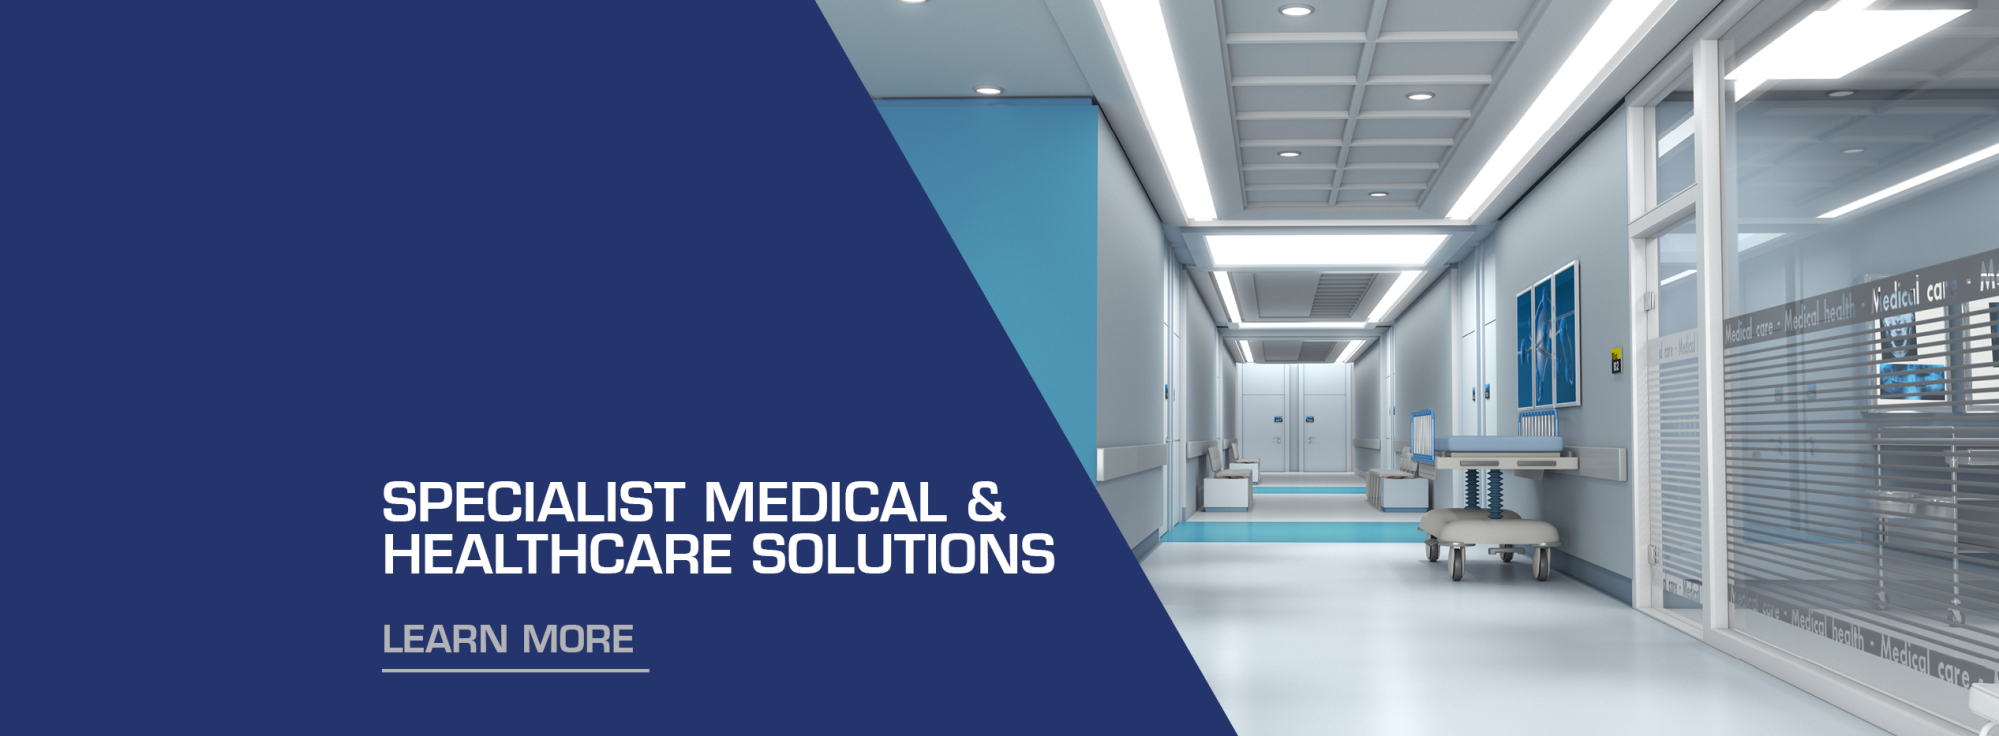 Specialist Medical & Healthcare Solutions. Learn More